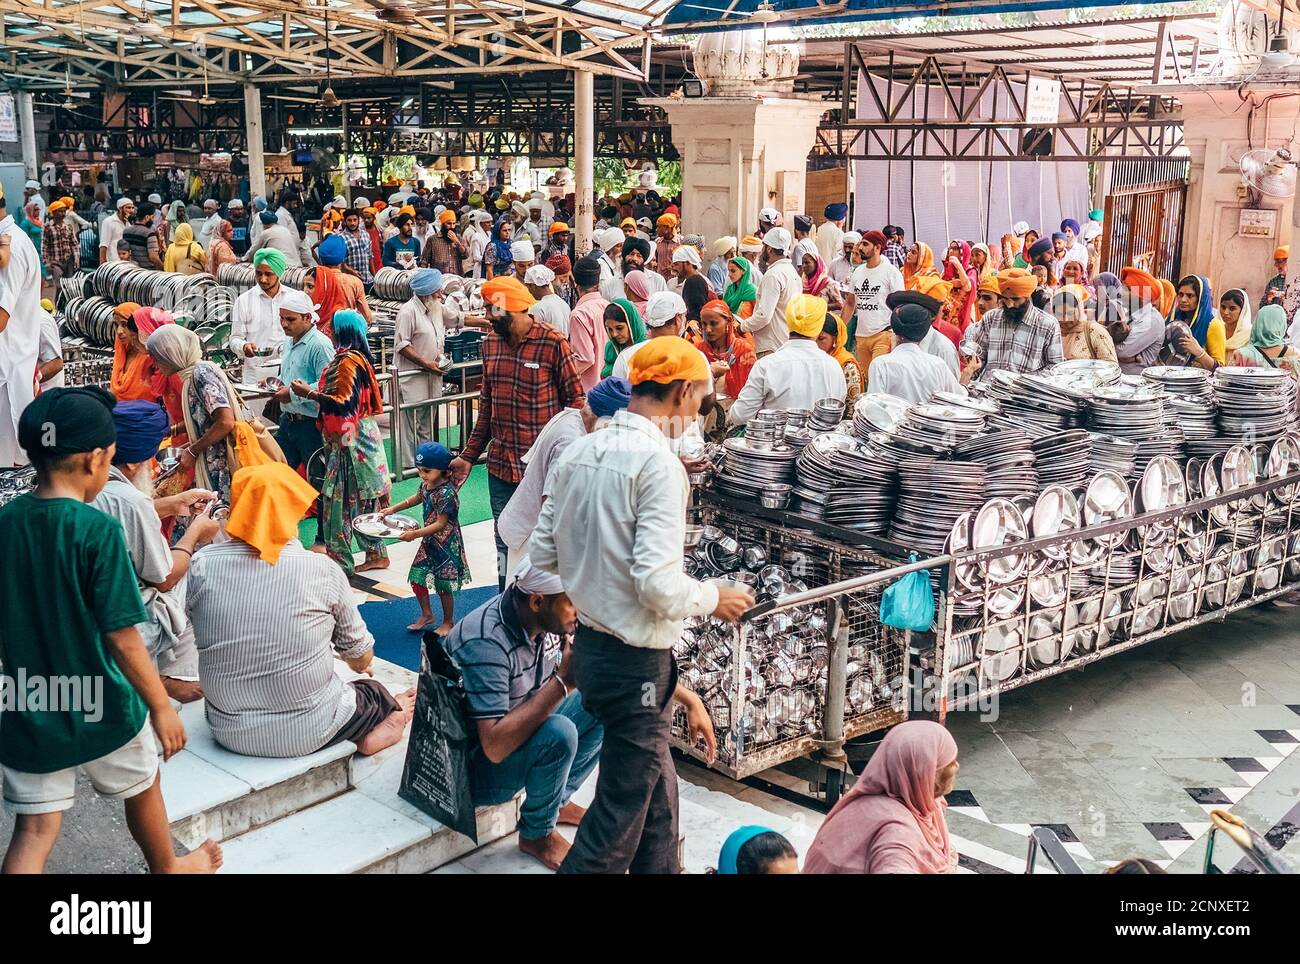 Amritsar, India – August 15, 2016: Pilgrims People come in and out Free canteen in Amritsar. This is the biggest free eatery in the world in Golden Te Stock Photo